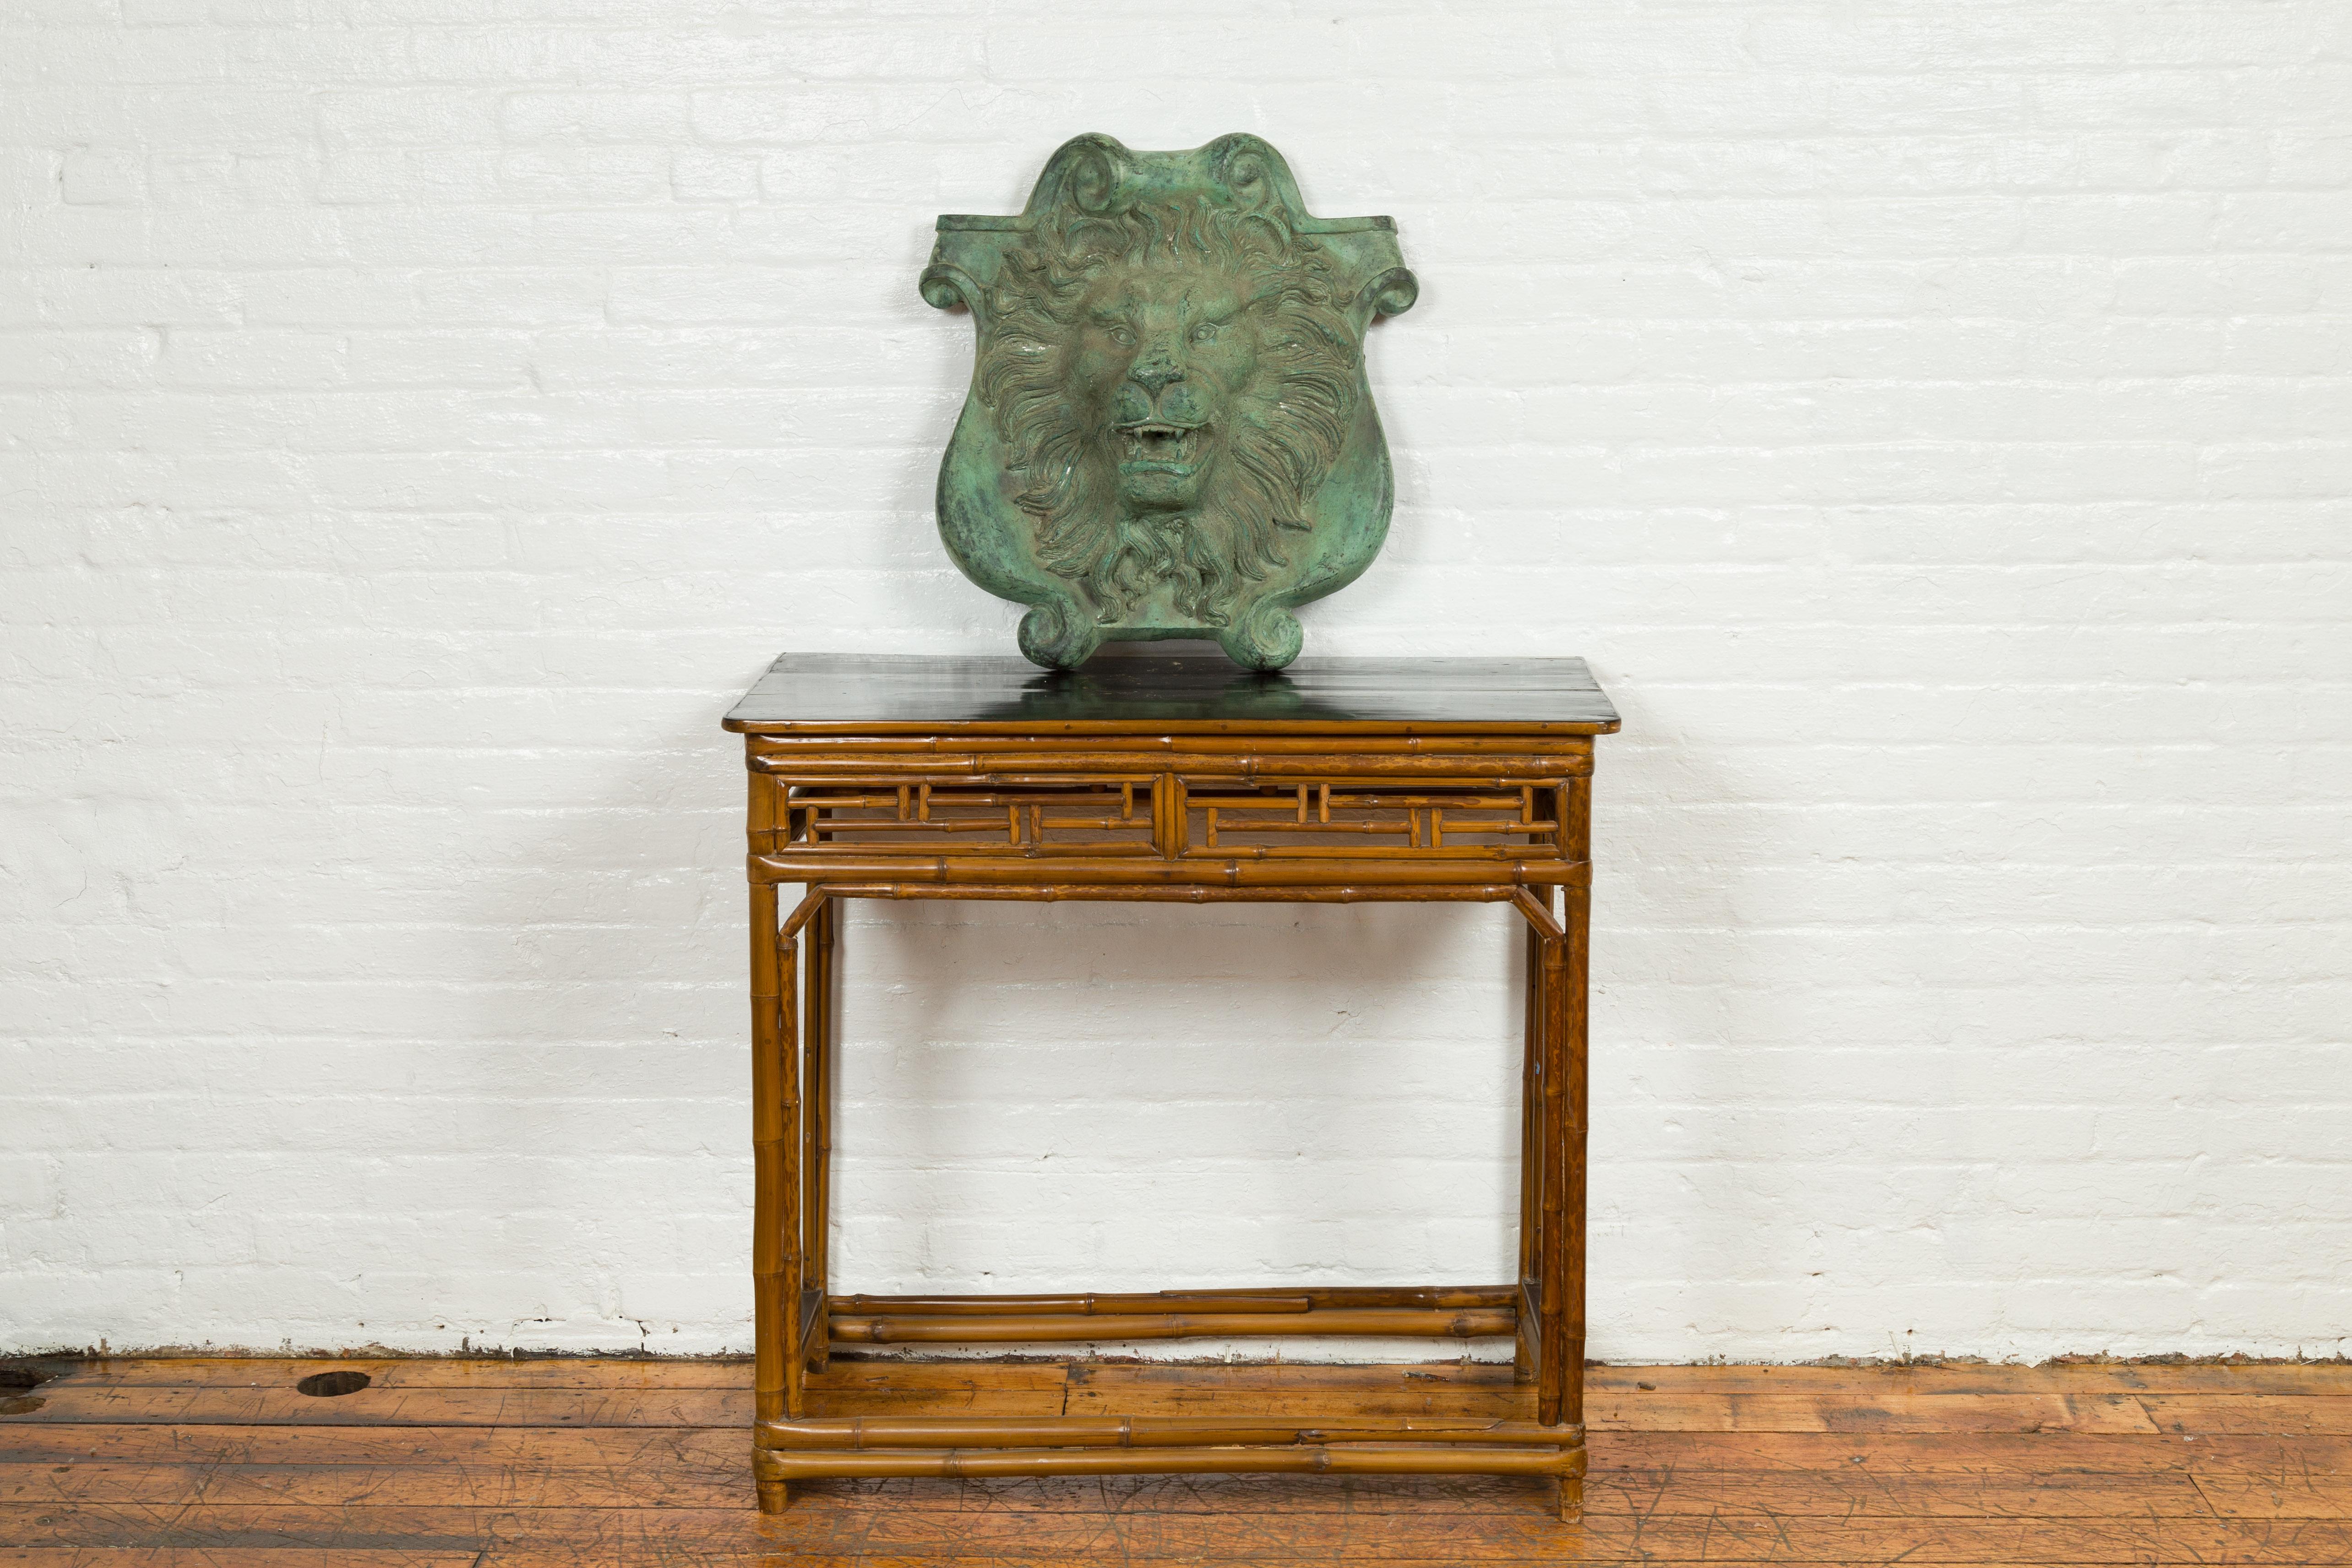 A contemporary bronze lion head wall fountain with Verde patina. Created with the traditional technique of the lost-wax (à la cire perdue) that allows a great precision and finesse in the details, this bronze wall fountain features a roaring lion